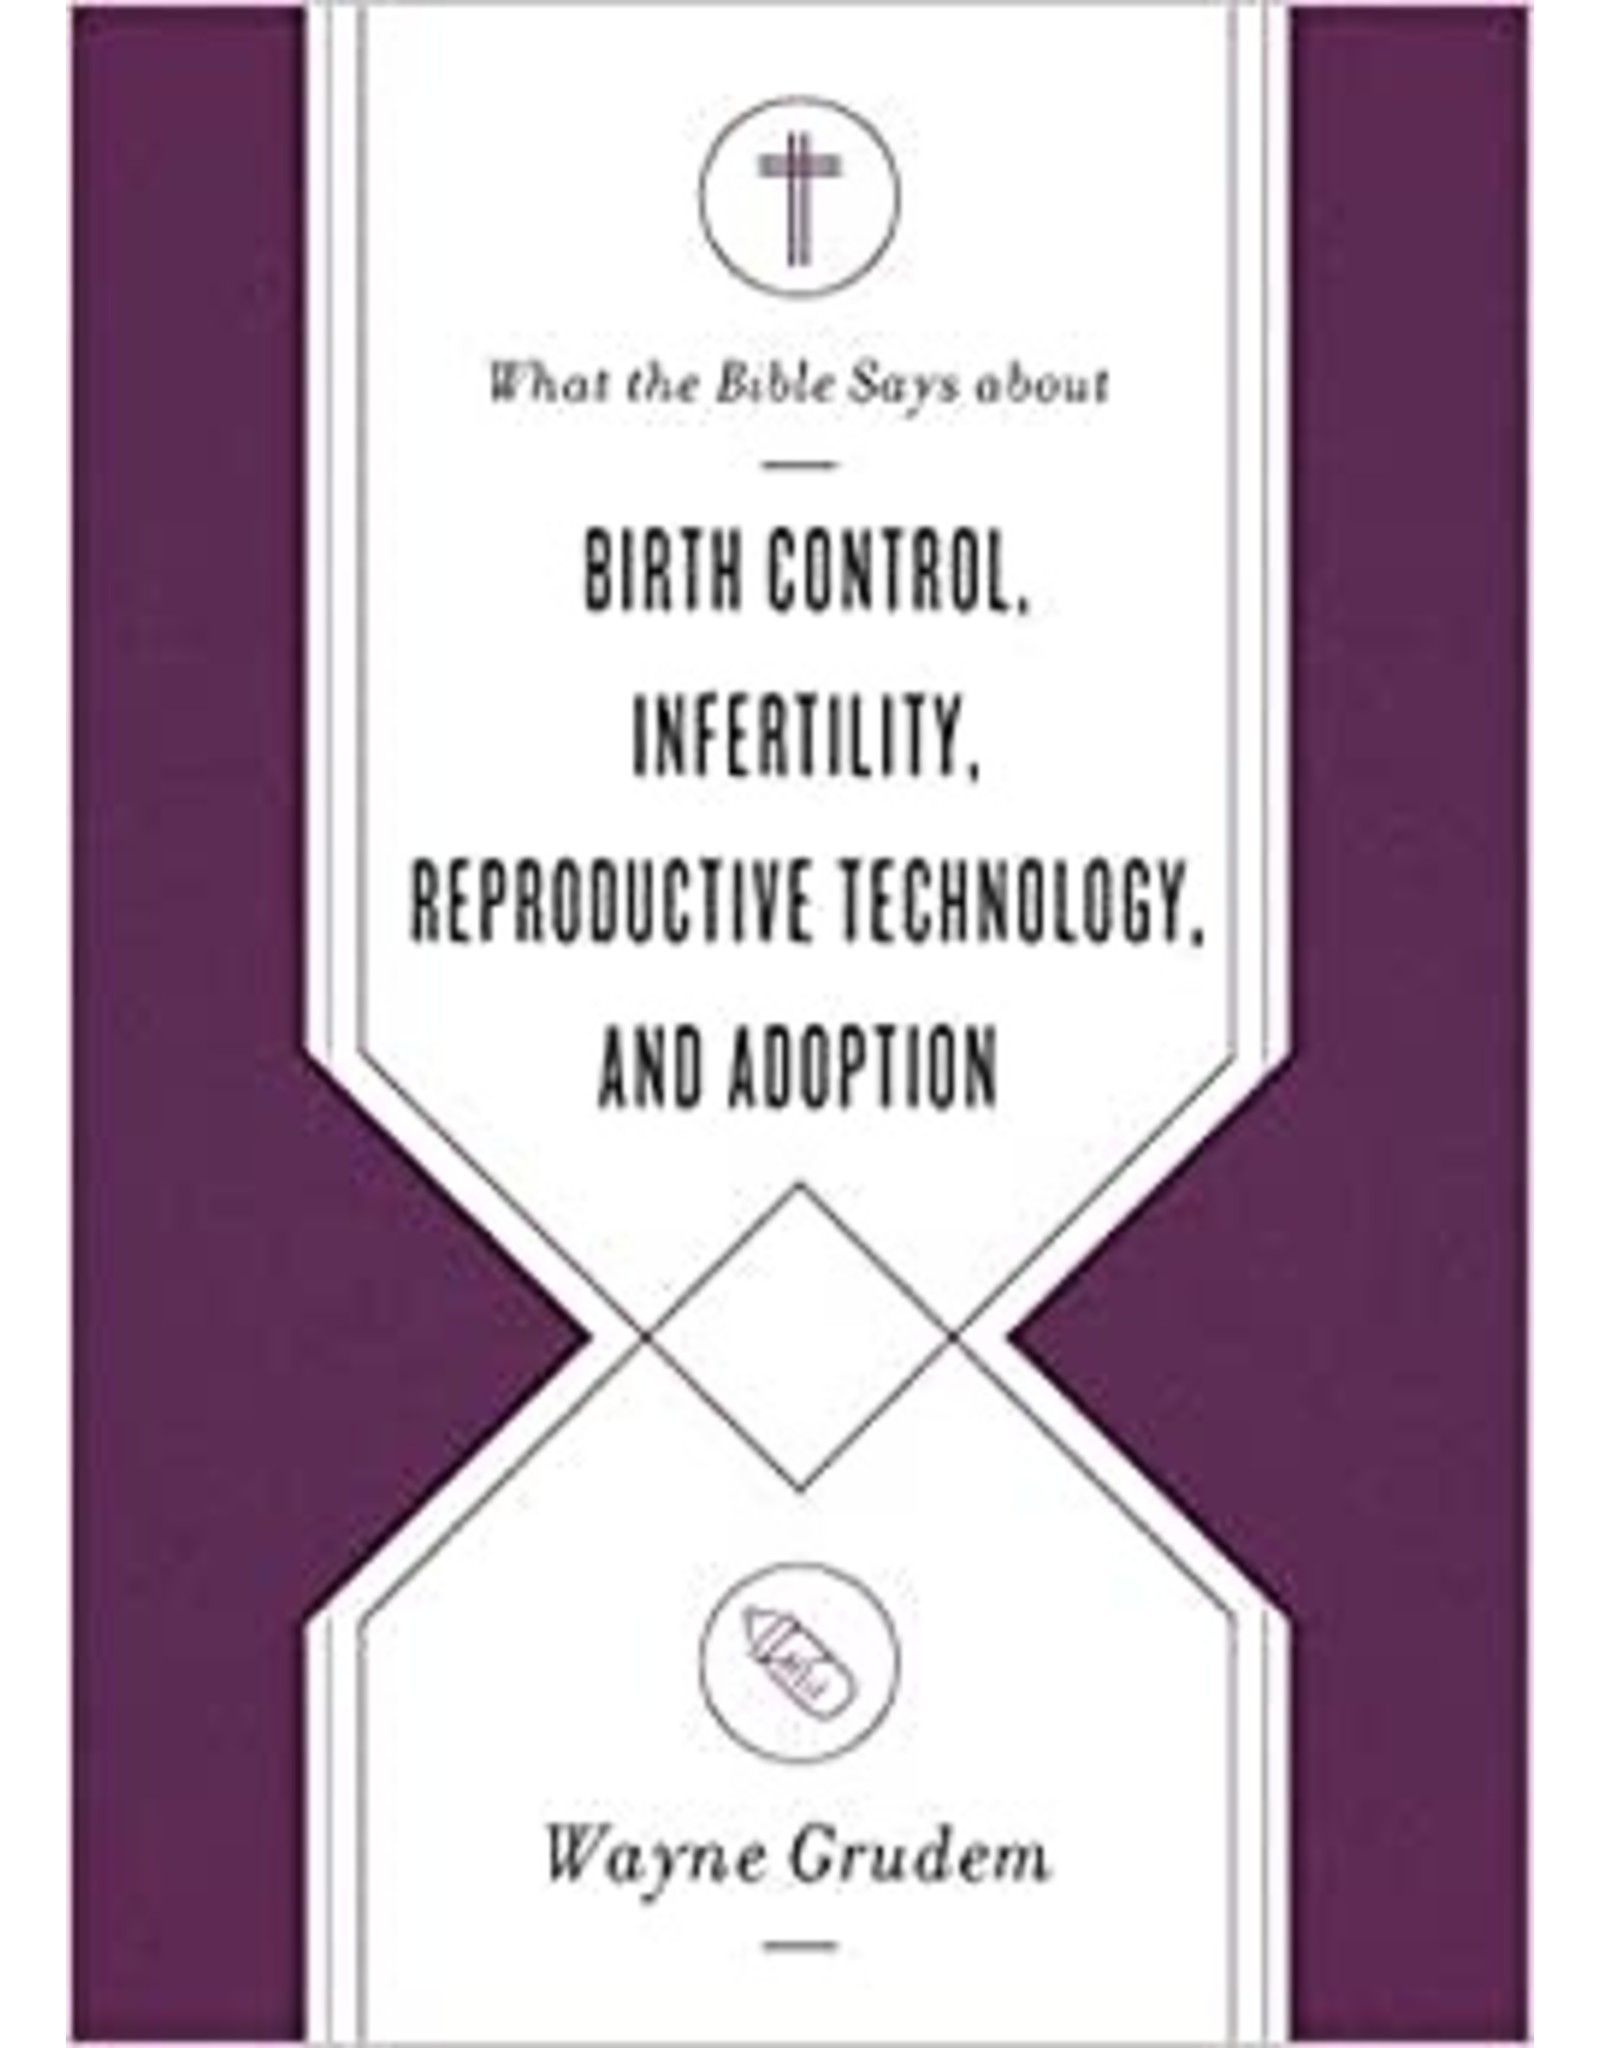 Wayne & Dennis Rainey Grudem What the Bible Says about Birth Control, Infertility, Reproductive Technology, and Adoption